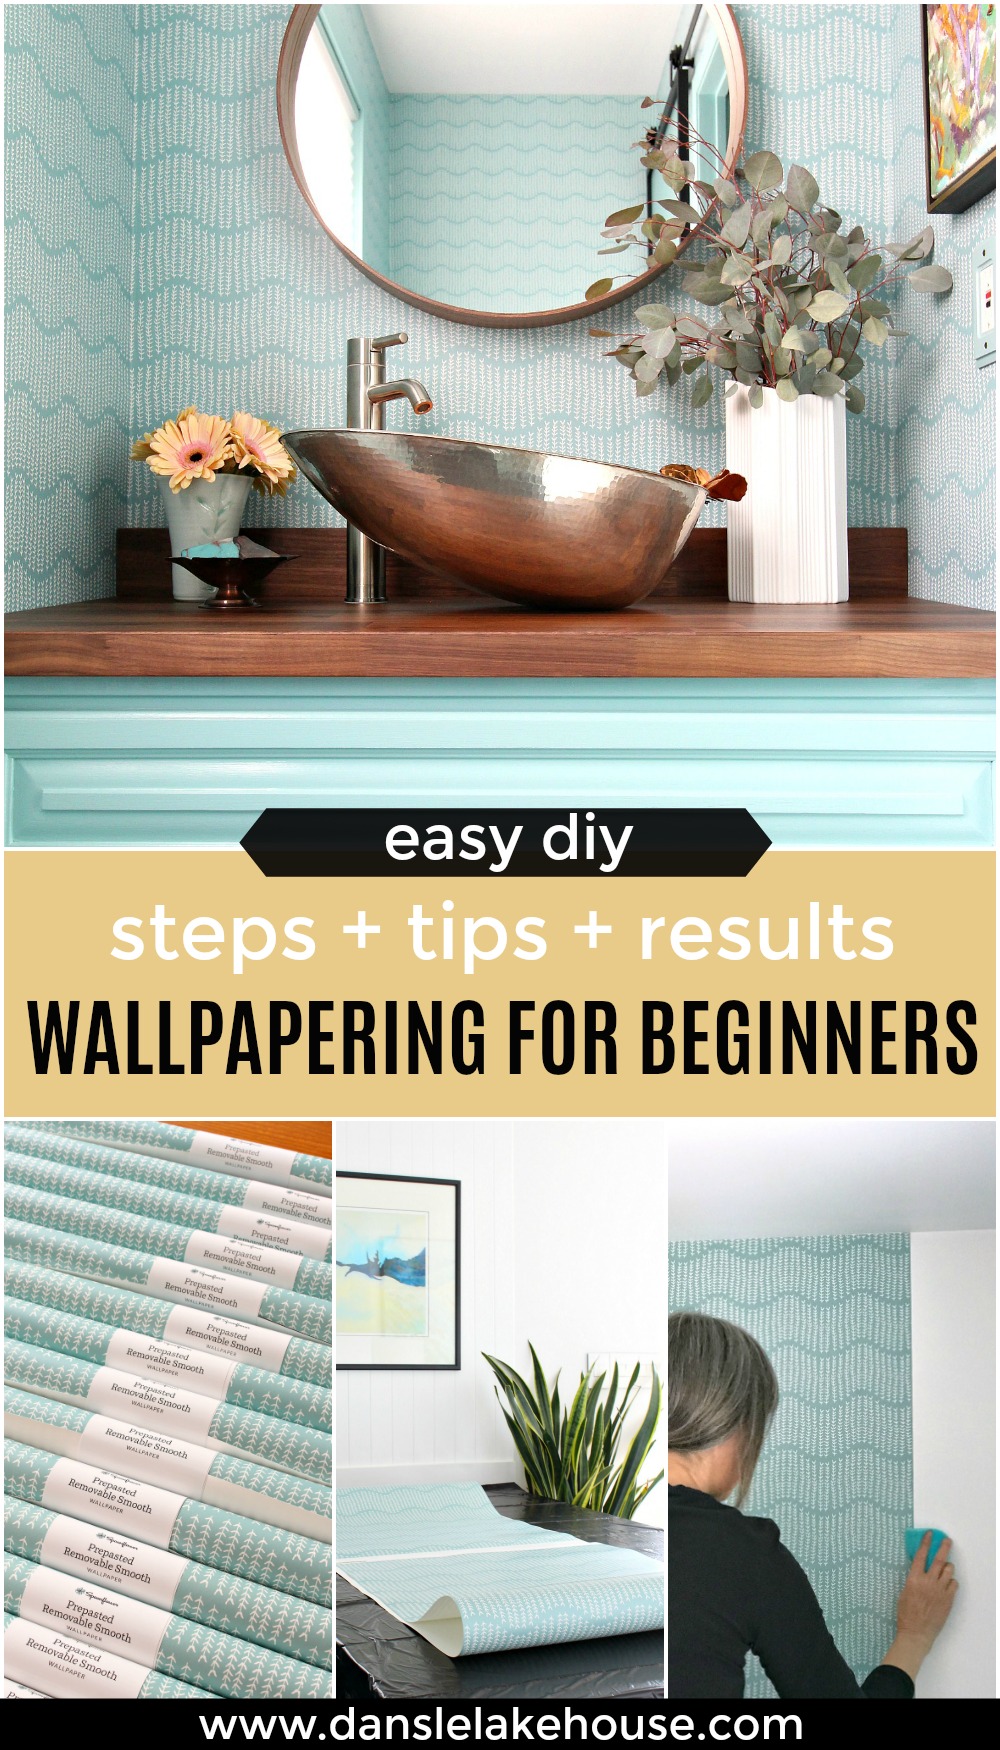 DIY Wallpapering for the First Time  Spoonflower Prepasted Removable Wallpaper  Review  Dans le Lakehouse